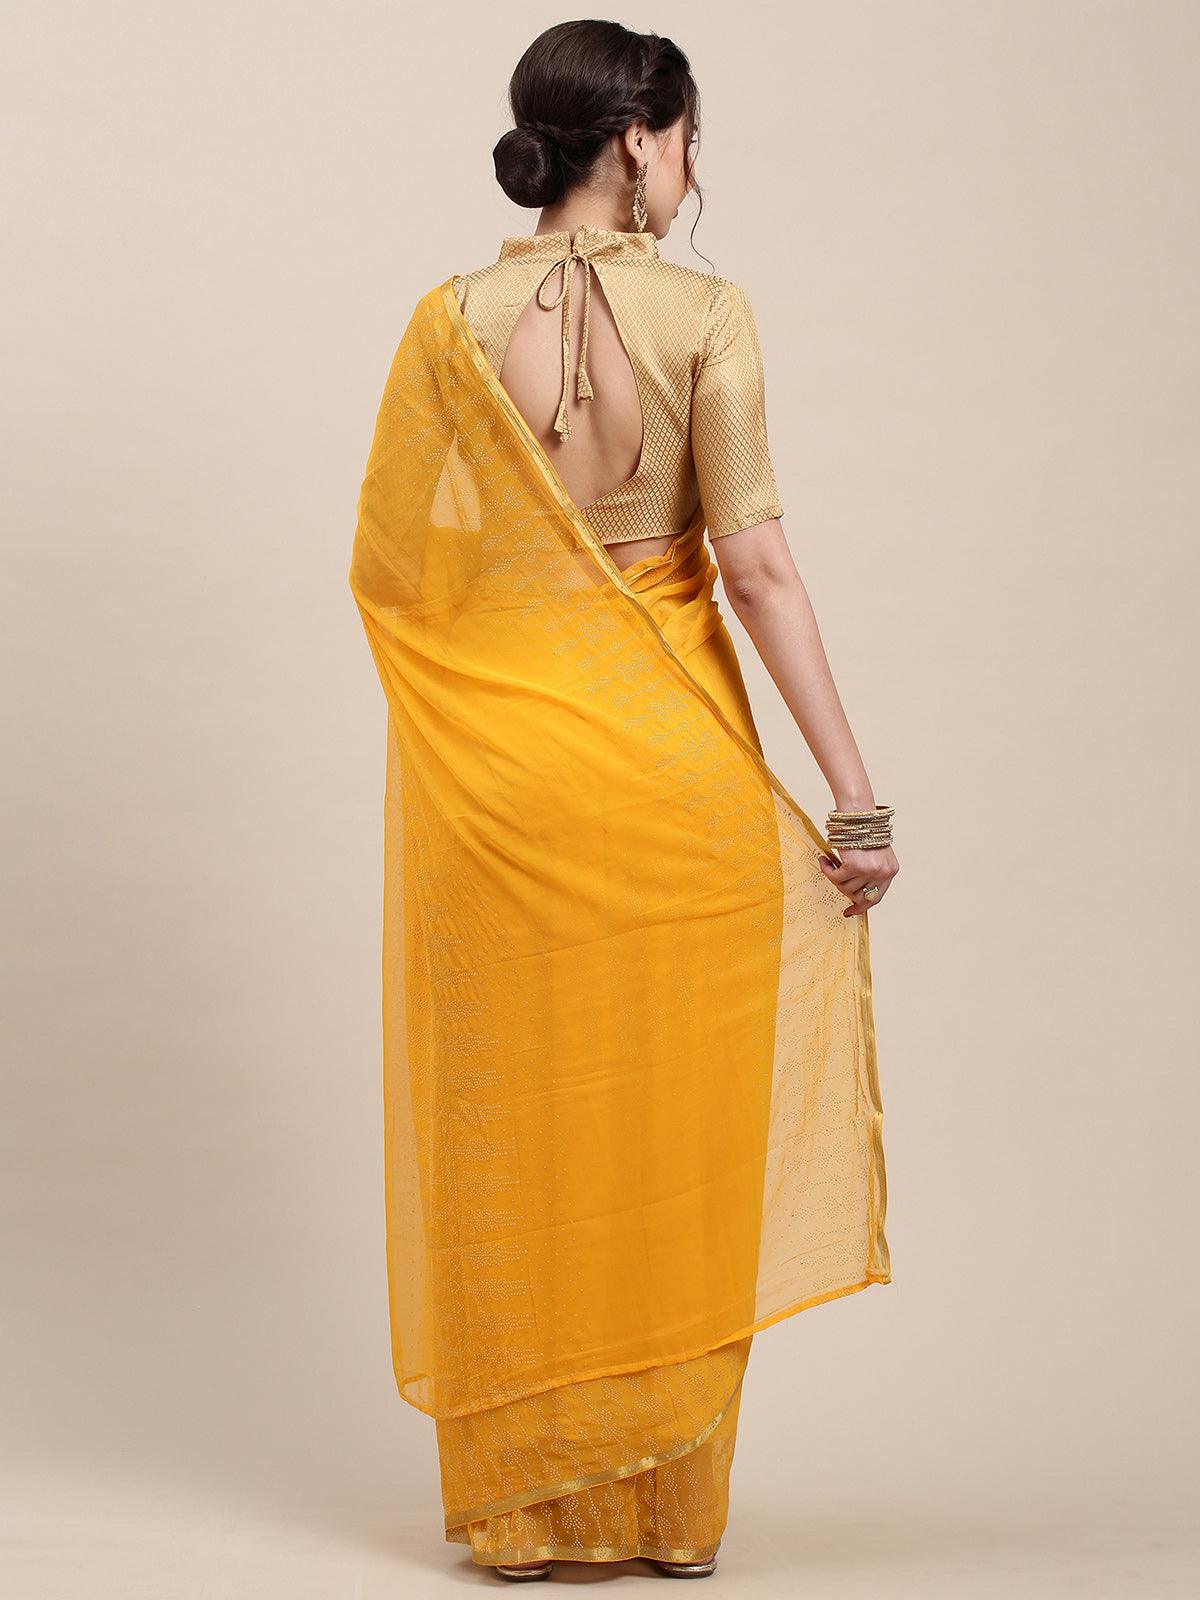 Women's Yellow Chiffon Woven Border Saree With Unstitched Blouse - Odette